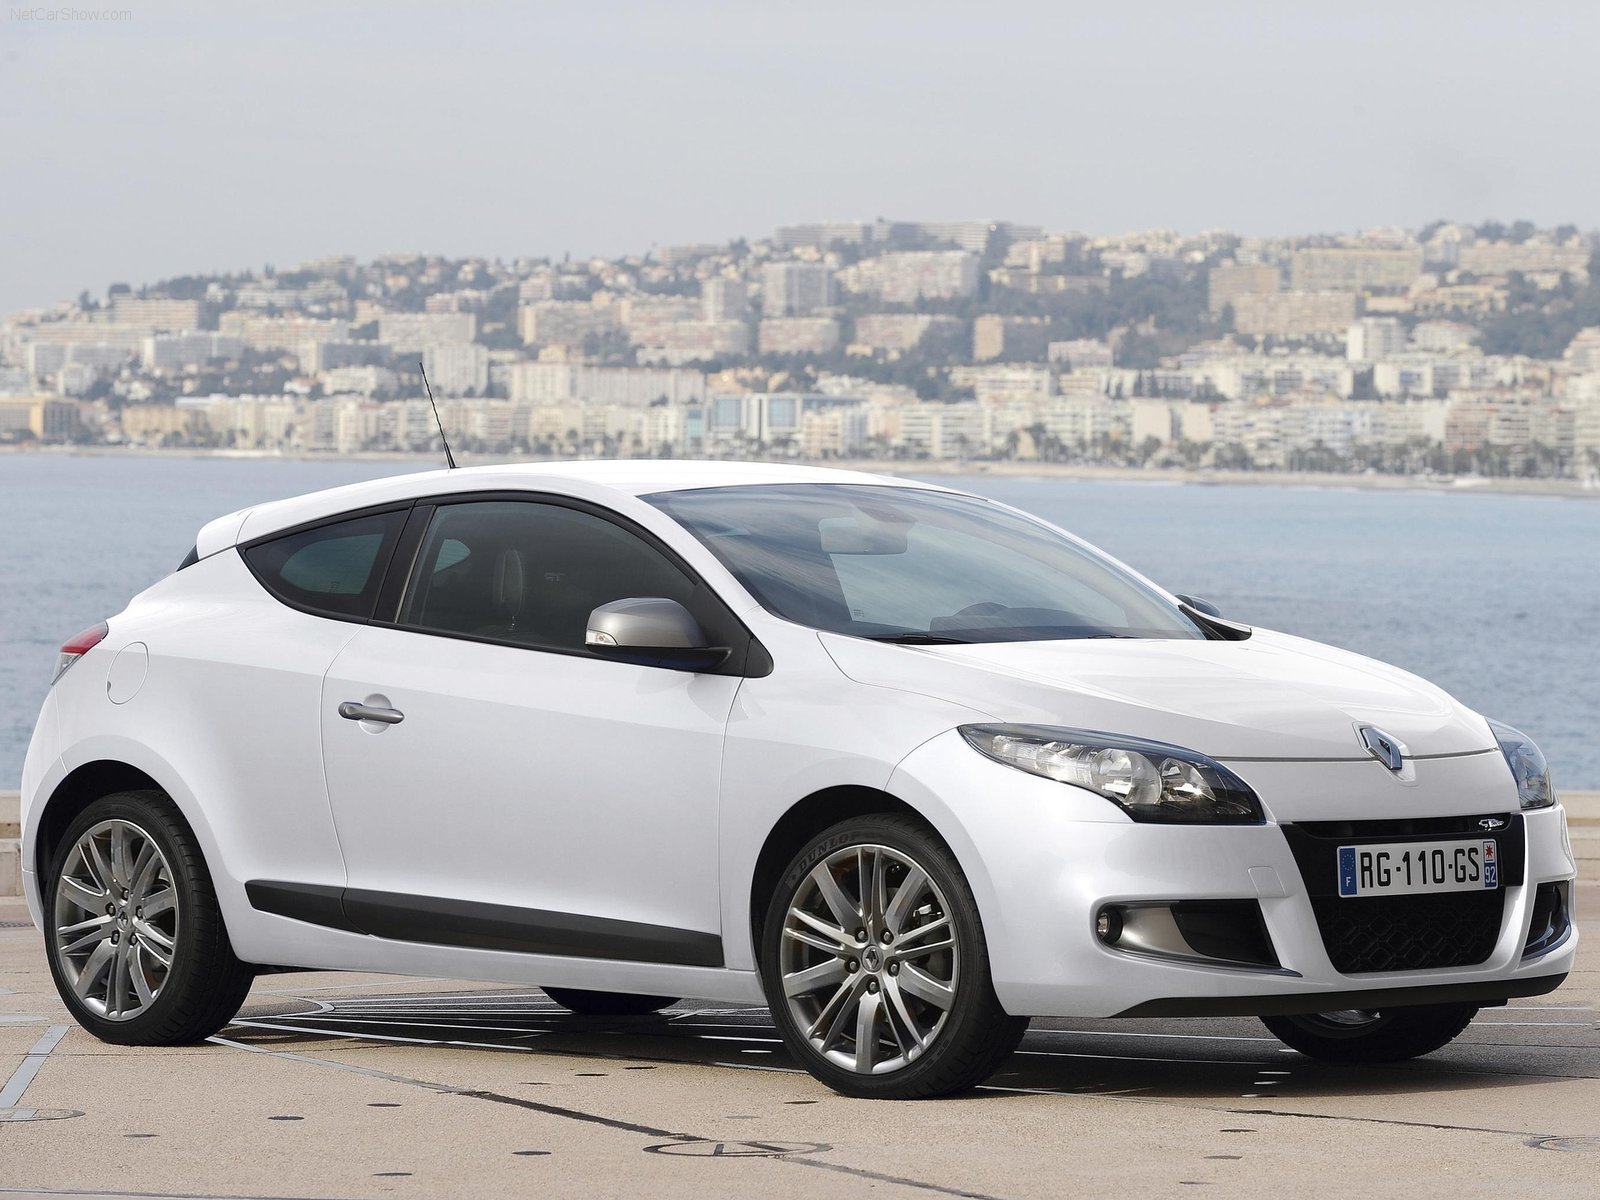 Renault Megane Coupe GT photo 73855